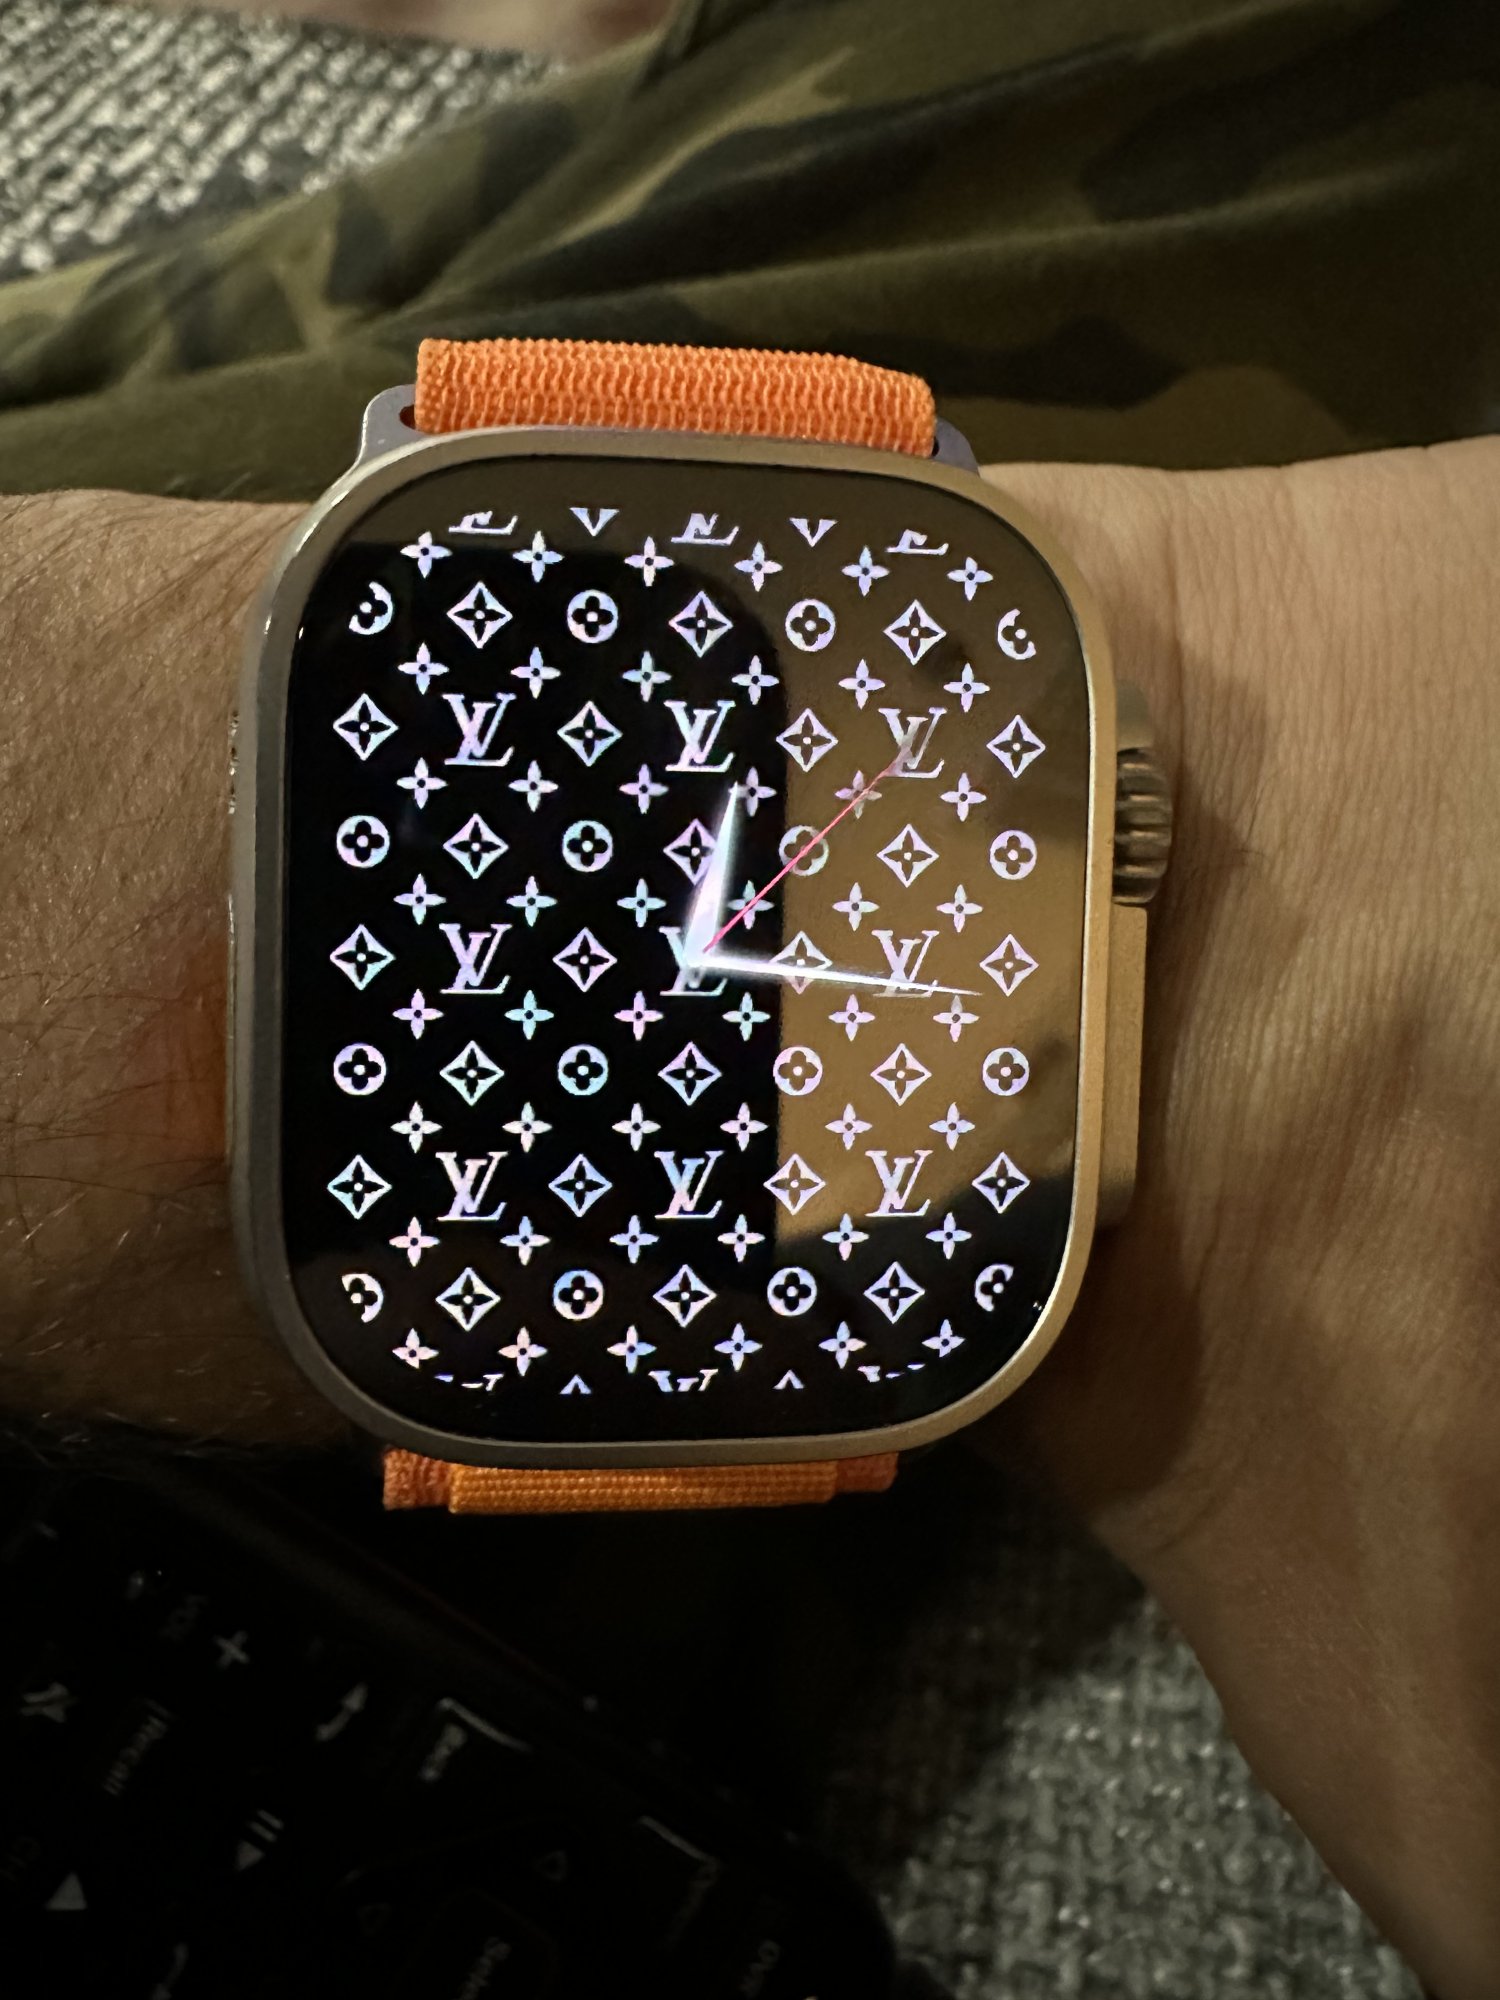 Post custom watch faces for Apple Watch [Merged], Page 40